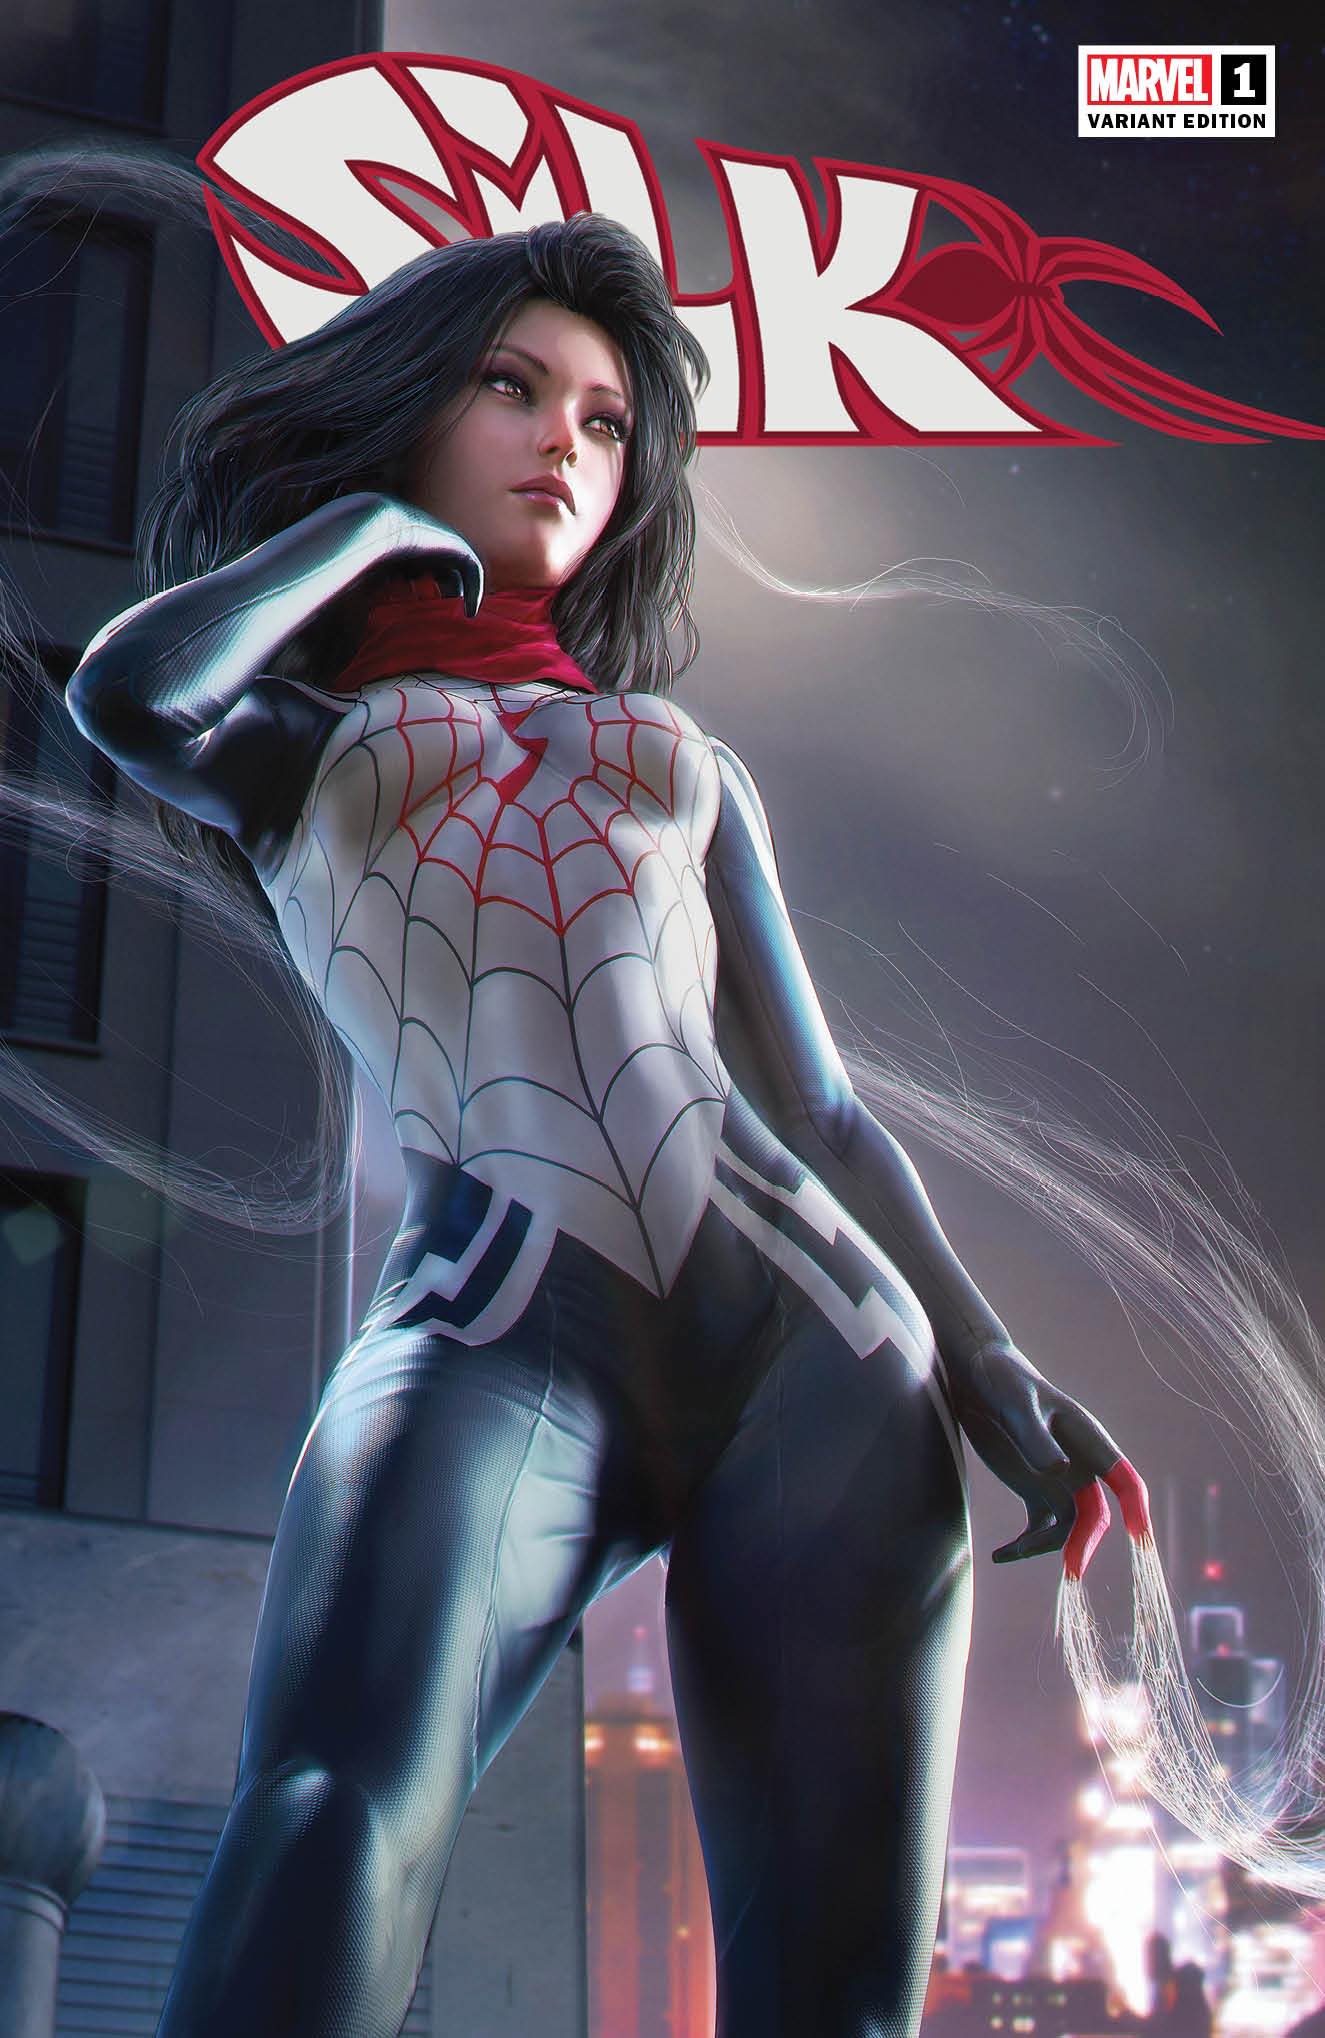 SILK #1 TIAGO DA SILVA VARIANT LIMITED TO 500 COPIES WITH NUMBERED COA